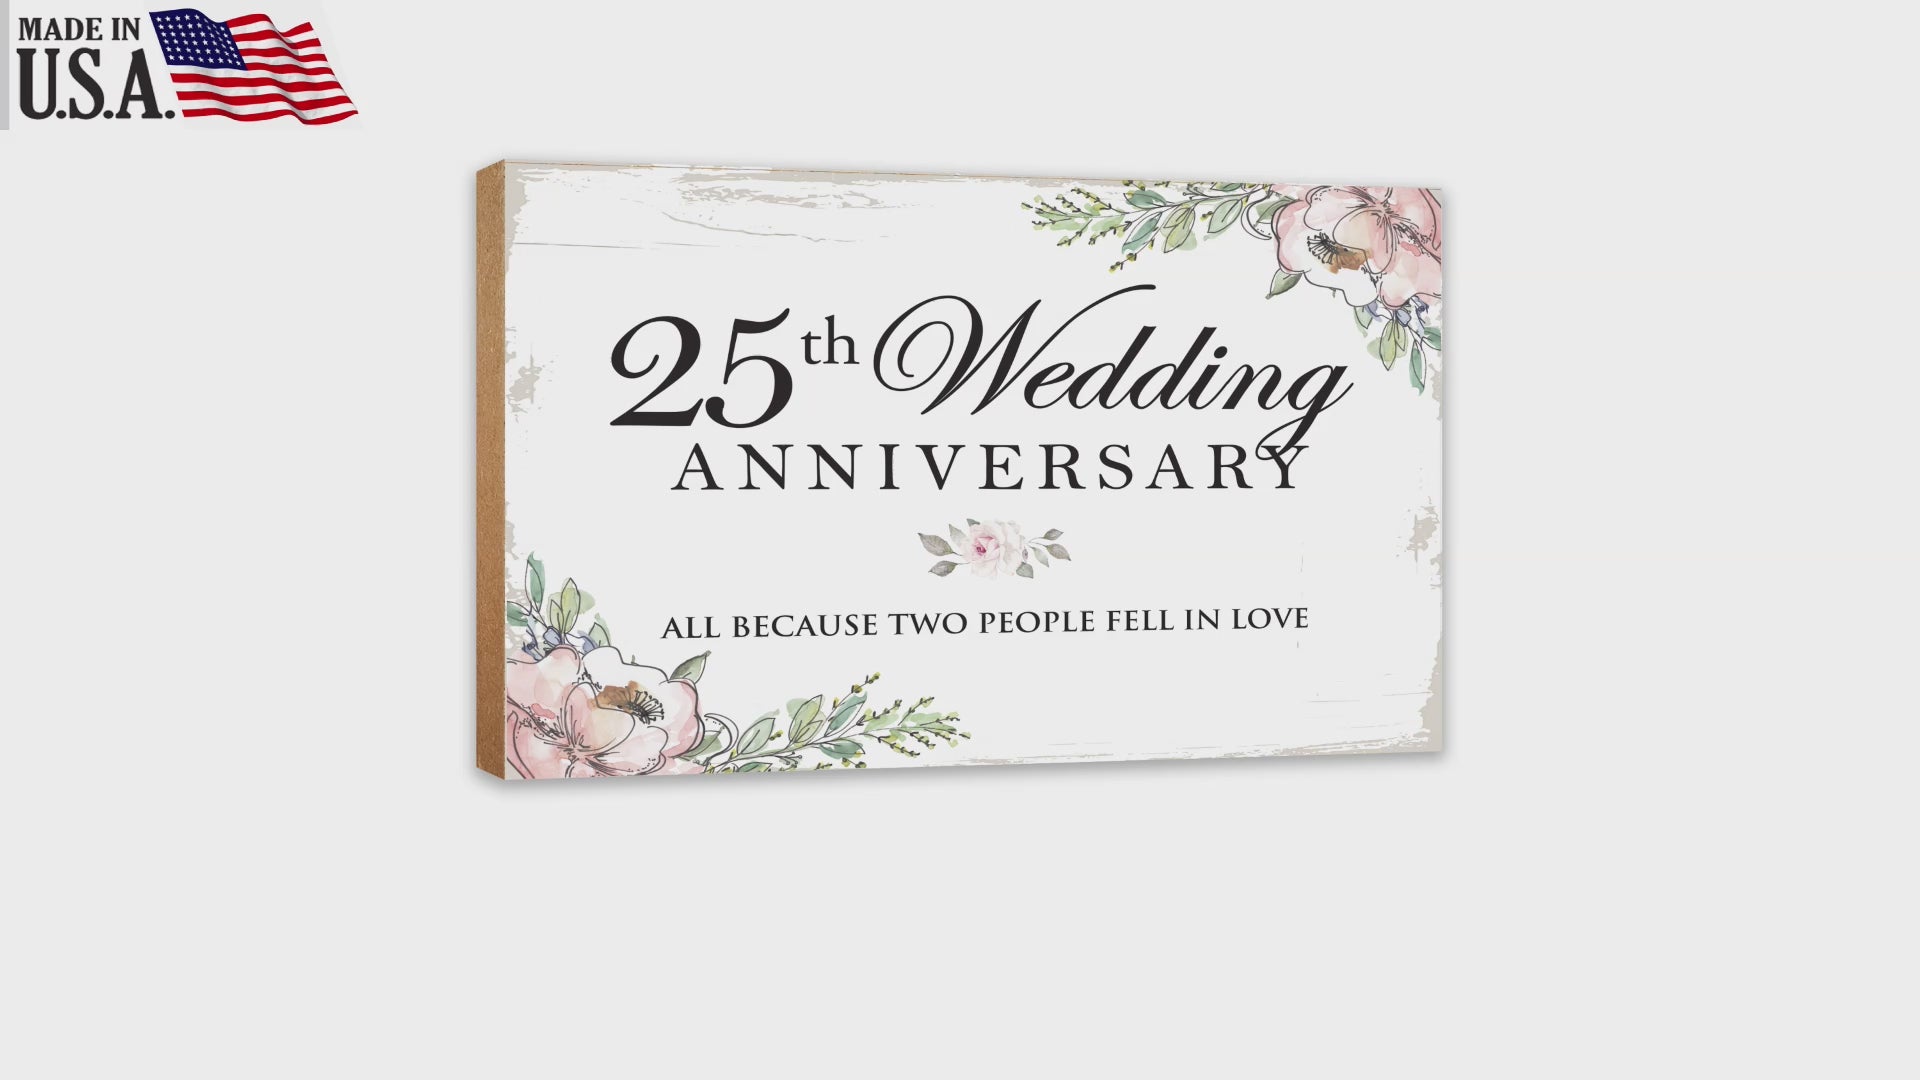 25th Wedding Anniversary Unique Shelf Decor and Tabletop Signs Gifts for Couples - Fell In Love